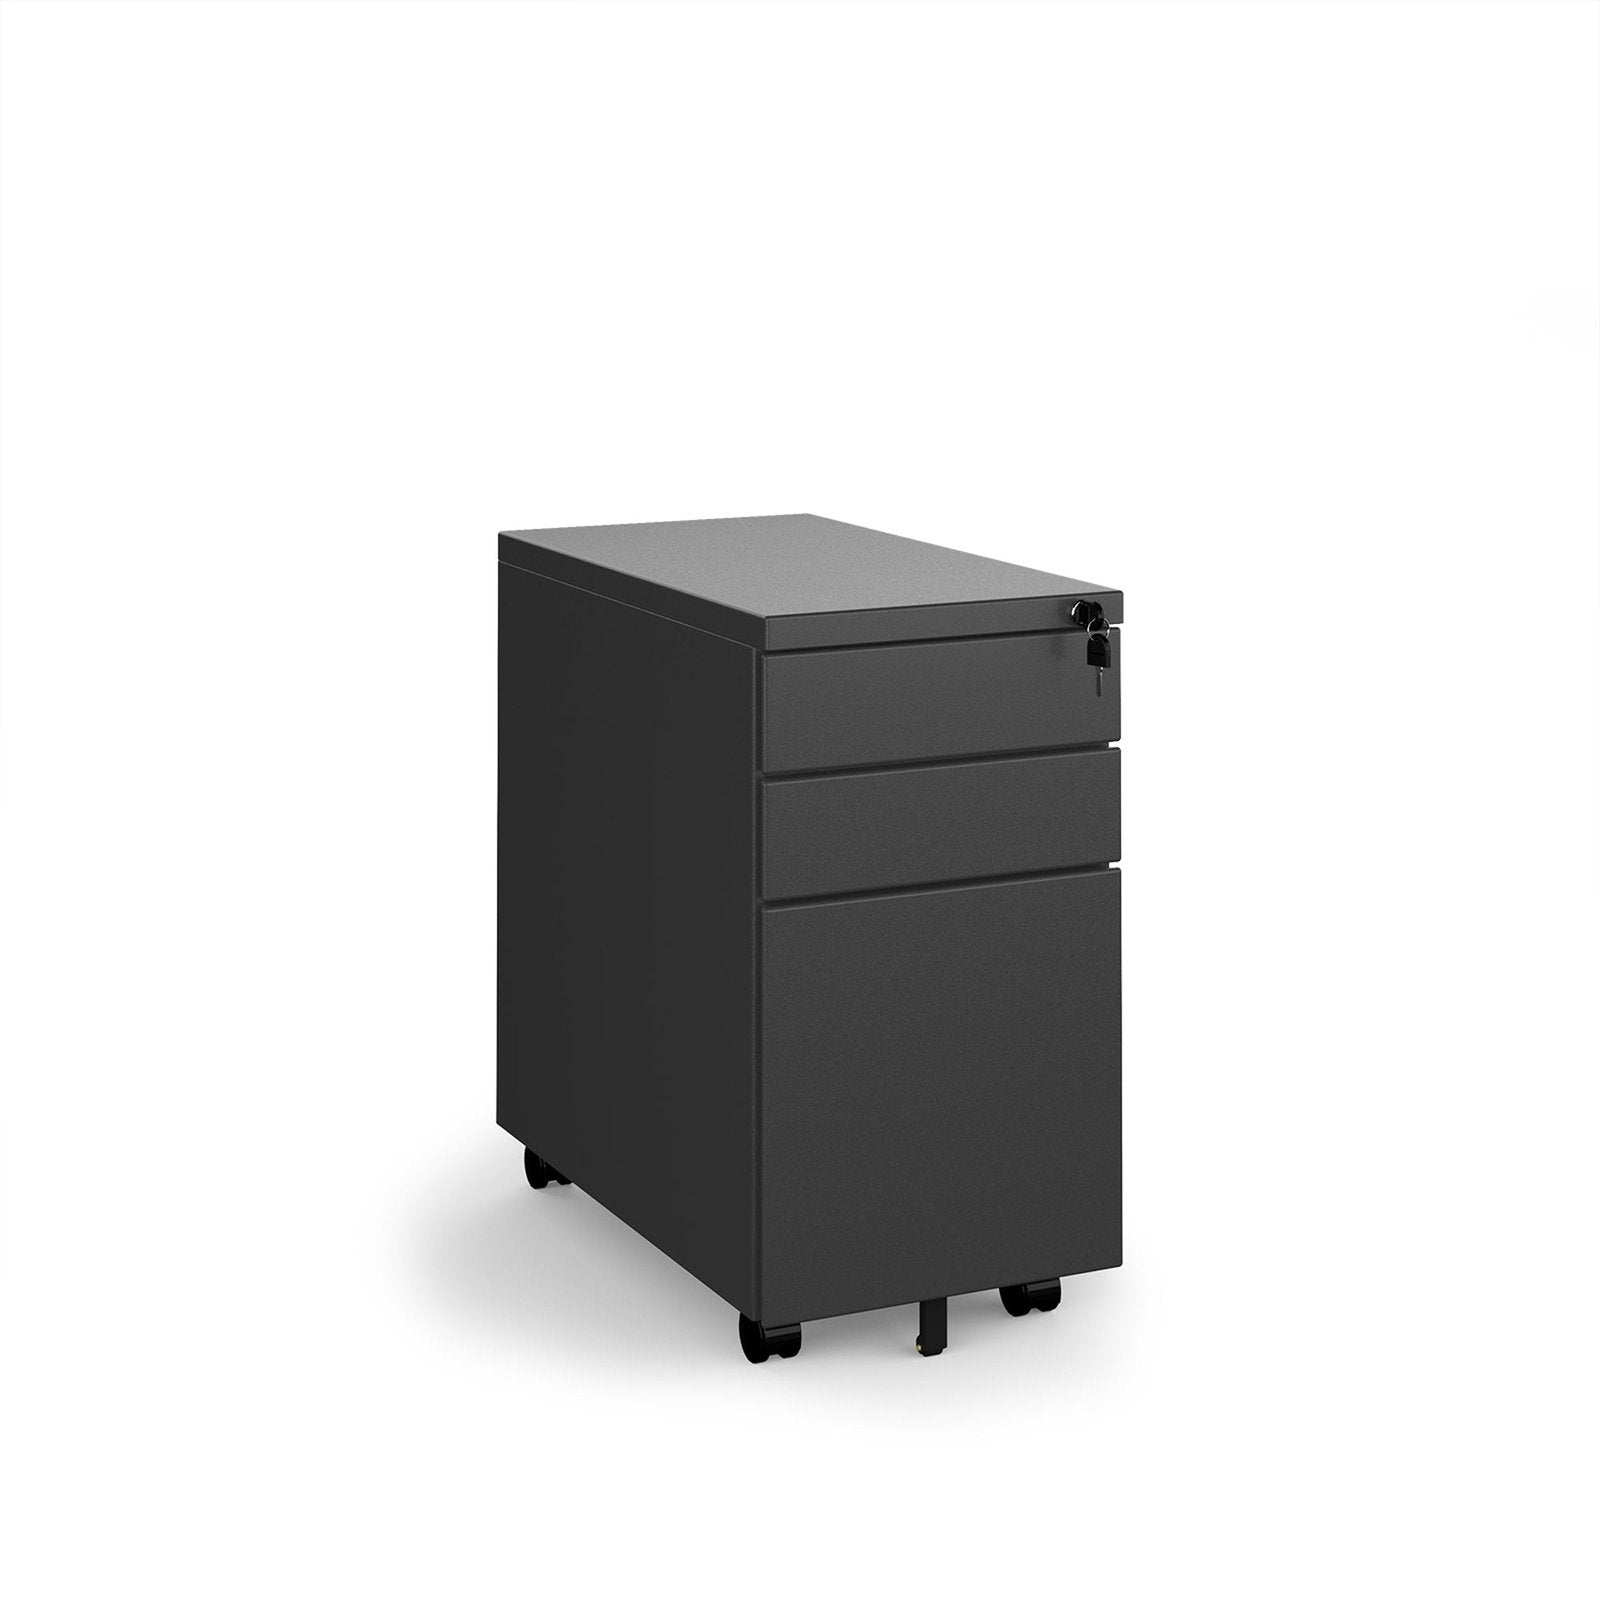 Steel 3 drawer narrow mobile pedestal - Office Products Online